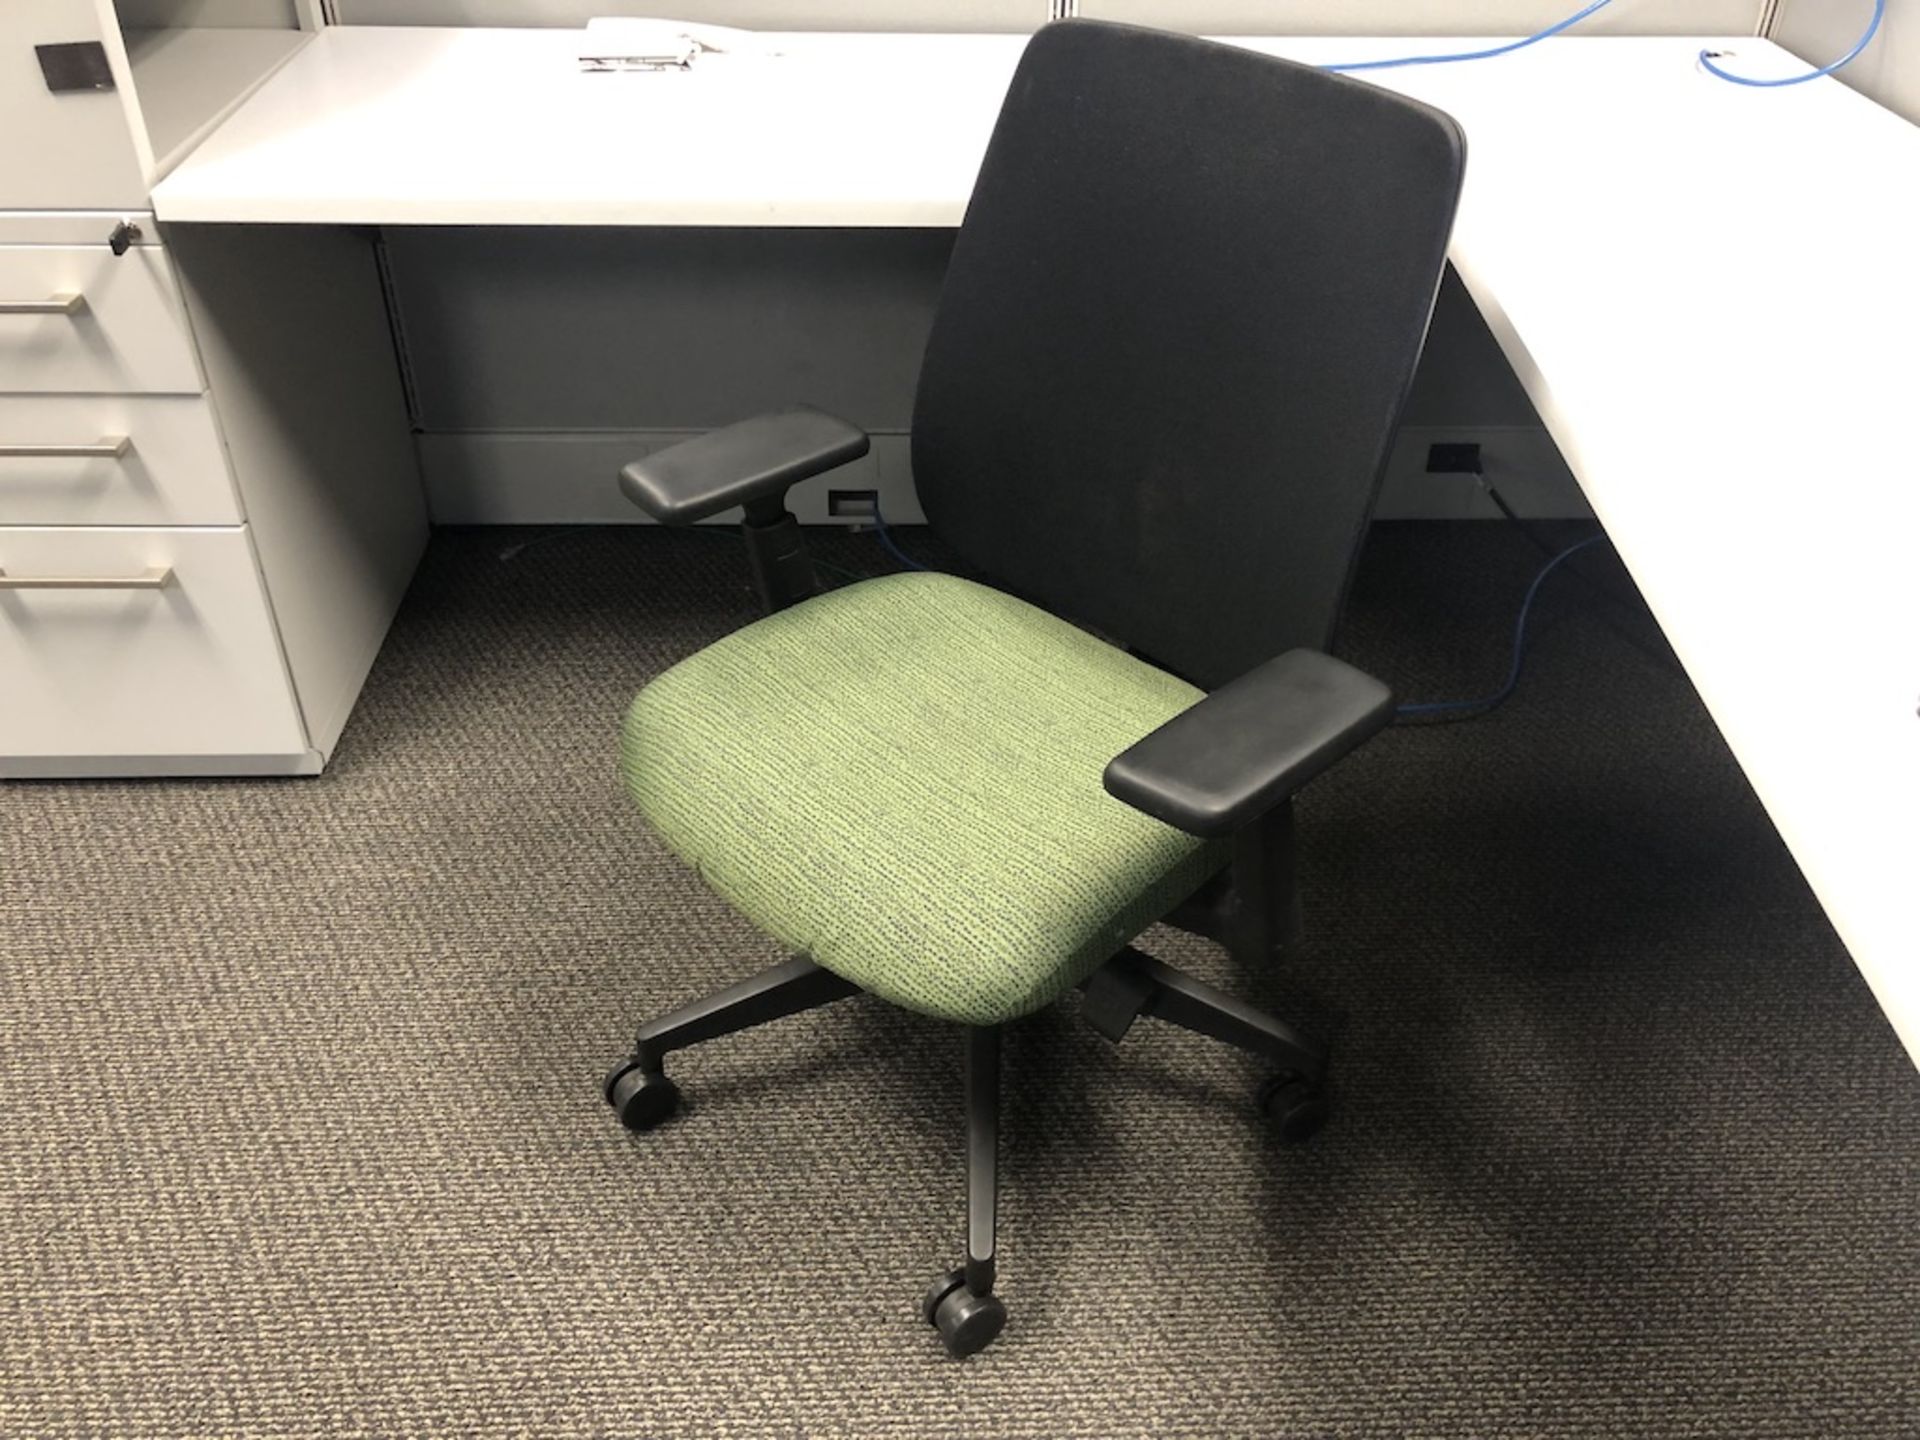 5 CASTER OFFICE CHAIR PADDED ARM REST ( BOTH ARMS THE RUBBER COATING HAS SPLIT ), GREEN SEATED - Image 3 of 3